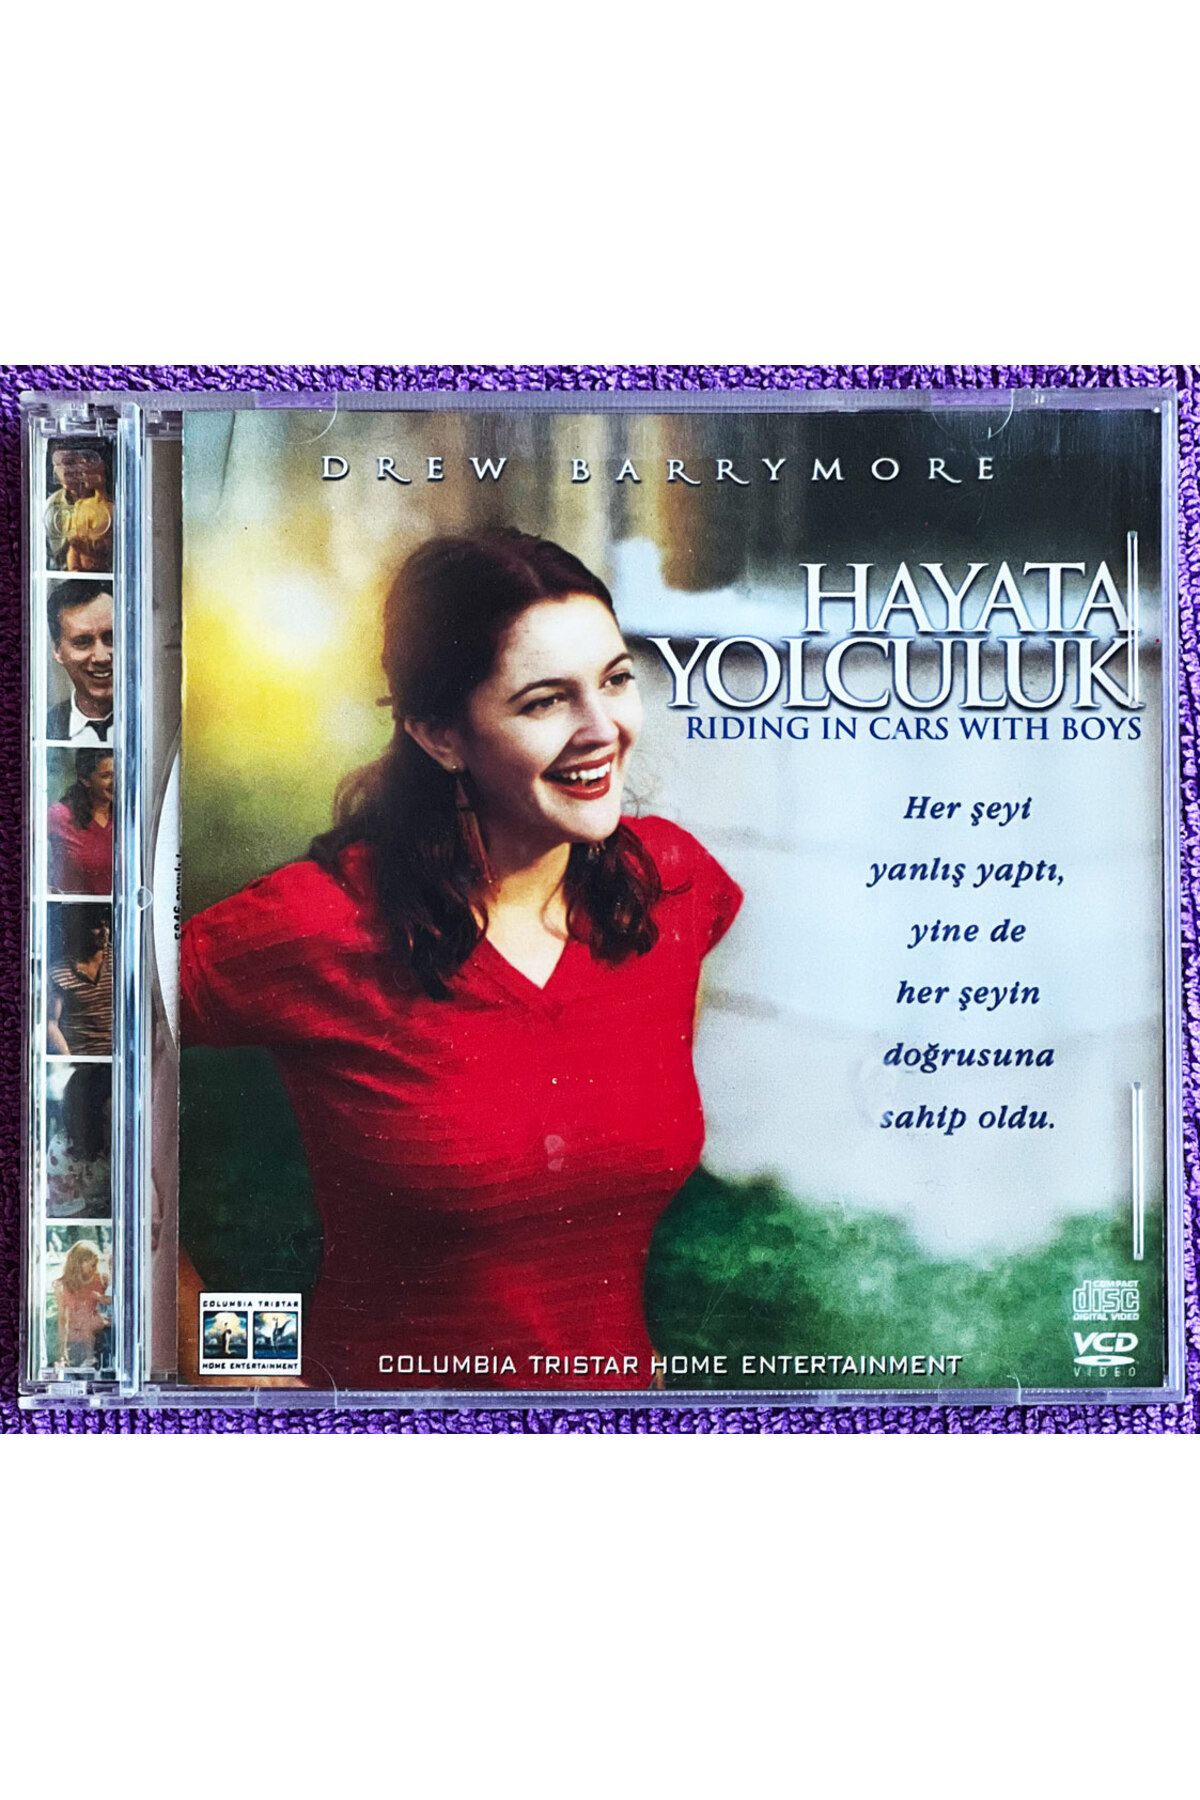 Kovak Kailyn Hayata Yolculuk - Riding in Cars With Boys (2001) VCD Film ' Drew Barrymore '